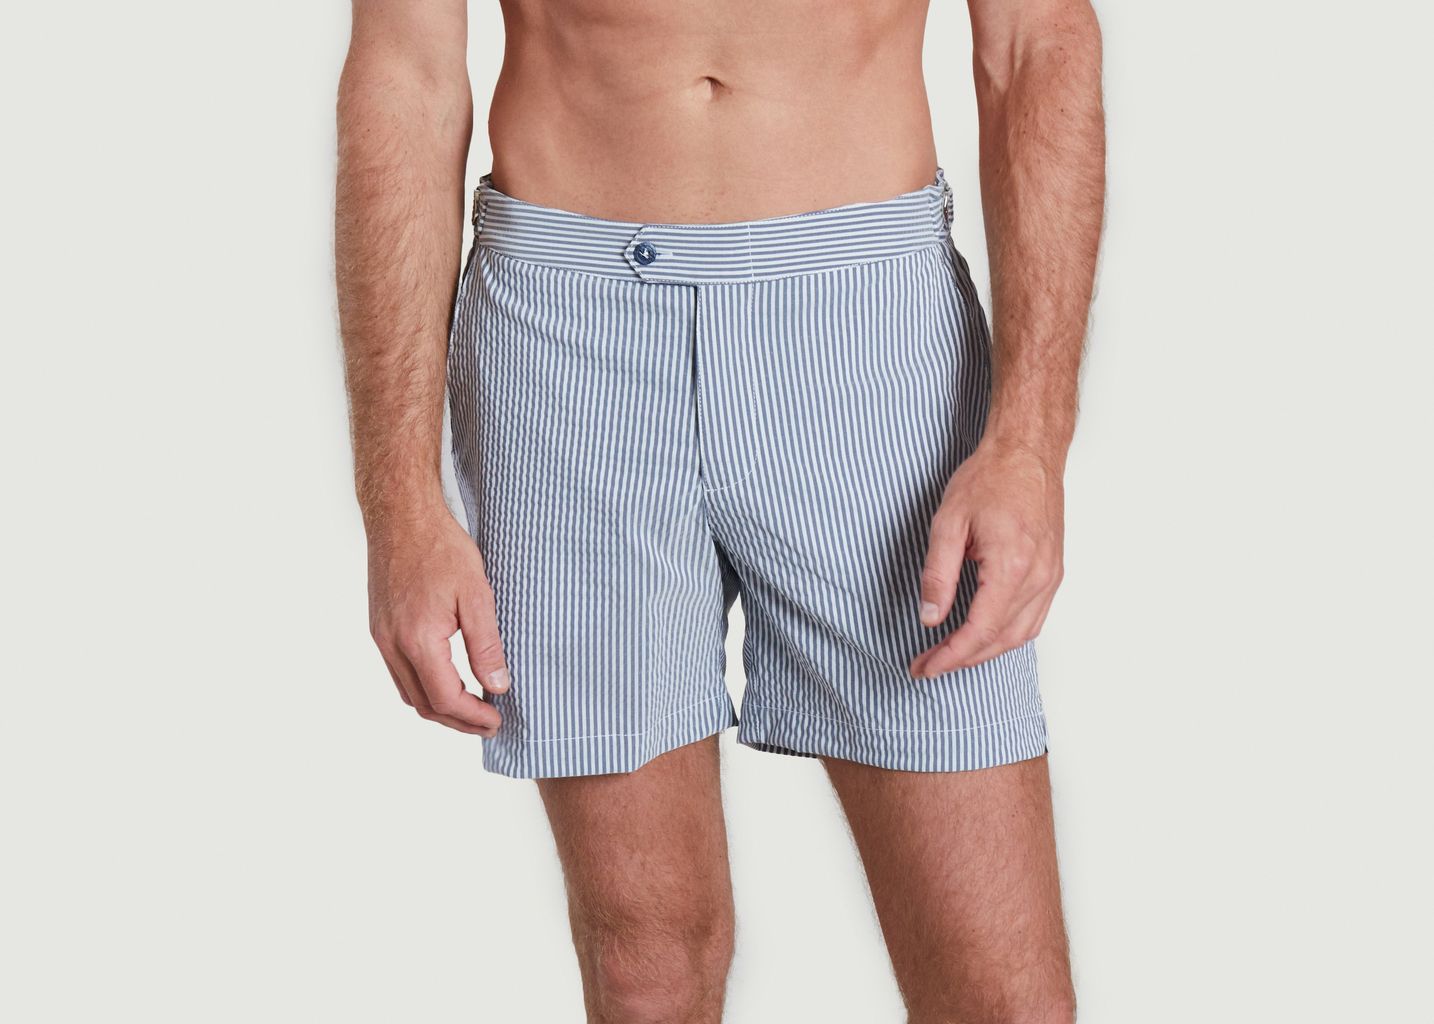 Swim shorts with stripes - The Resort Co